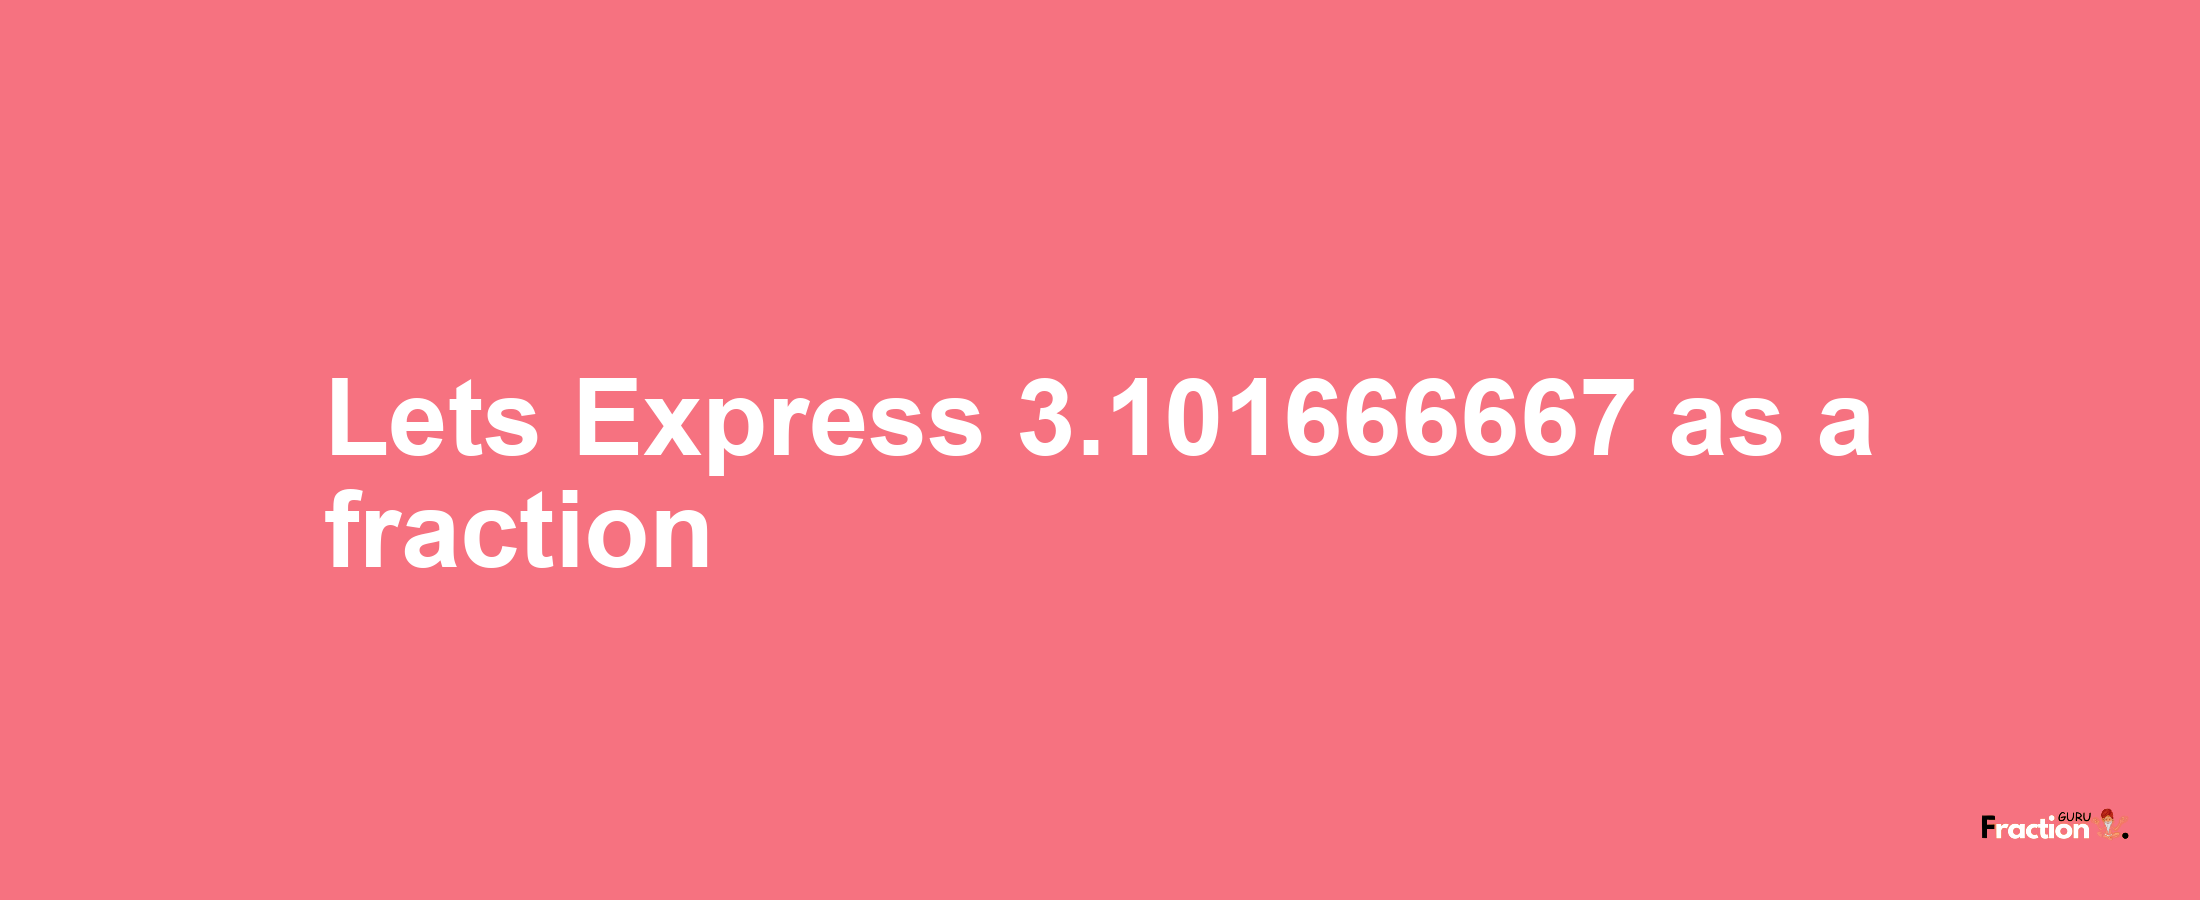 Lets Express 3.101666667 as afraction